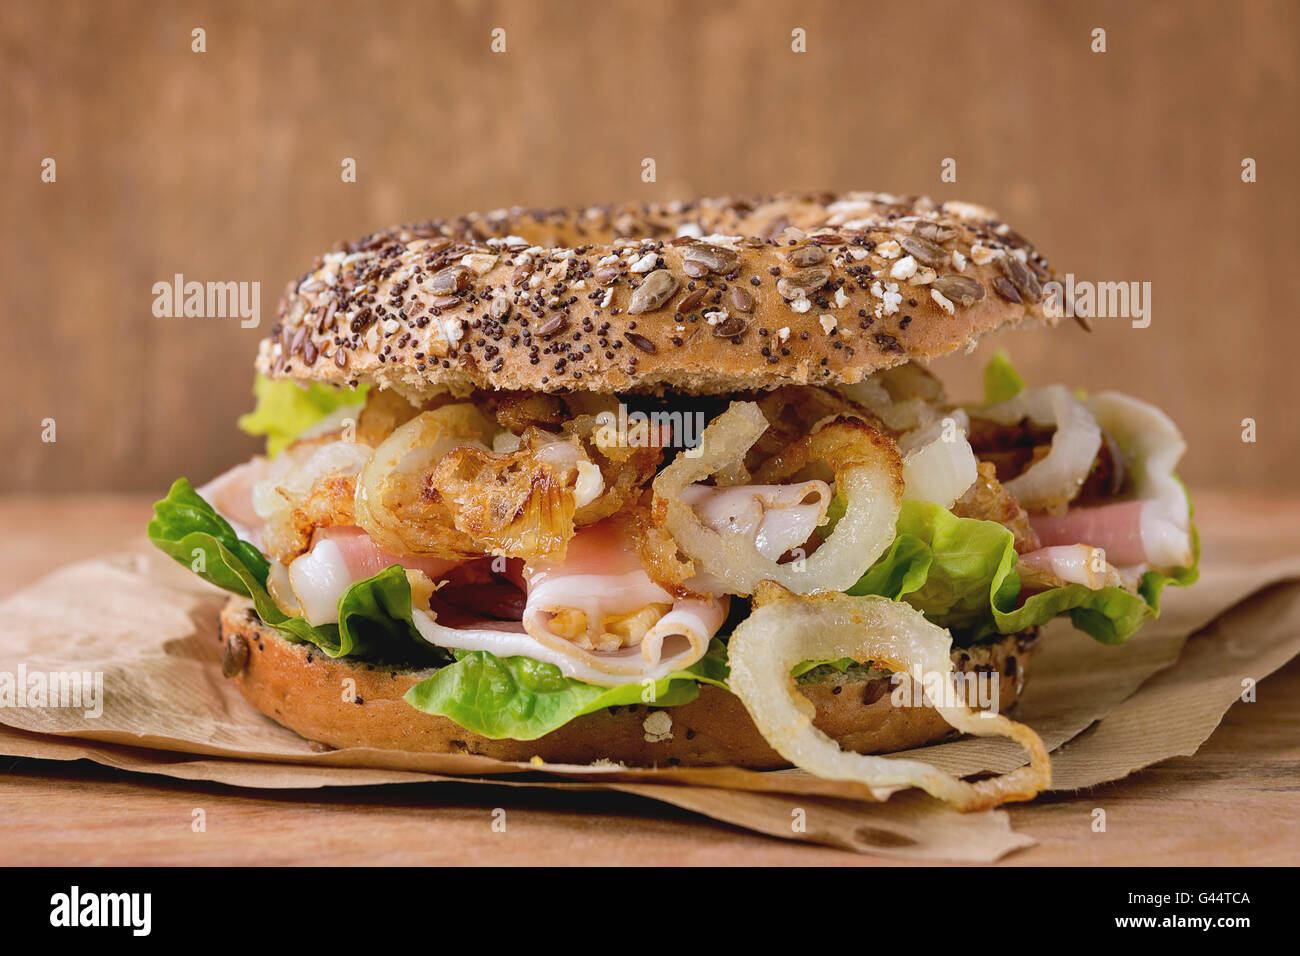 Whole Grain bagel with fried onion, green salad and prosciutto ham on paper over wooden textured background. Close up Stock Photo